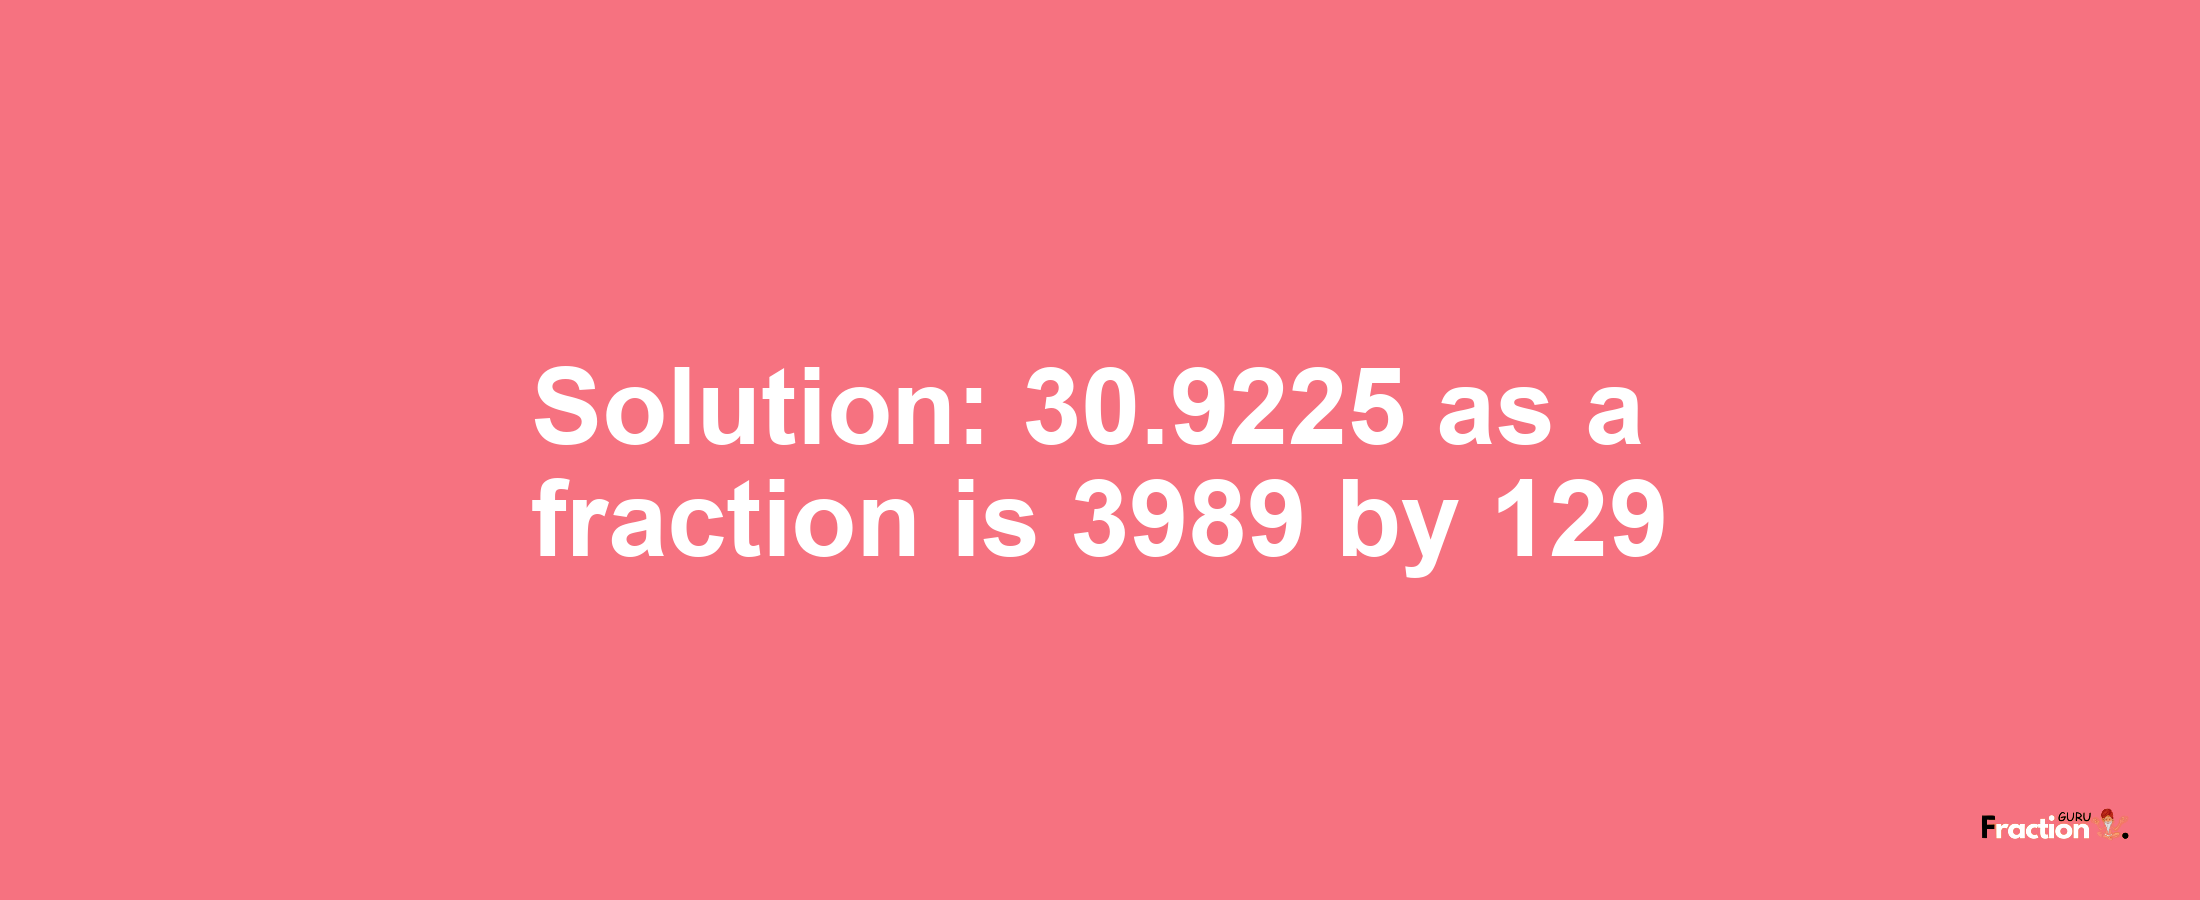 Solution:30.9225 as a fraction is 3989/129